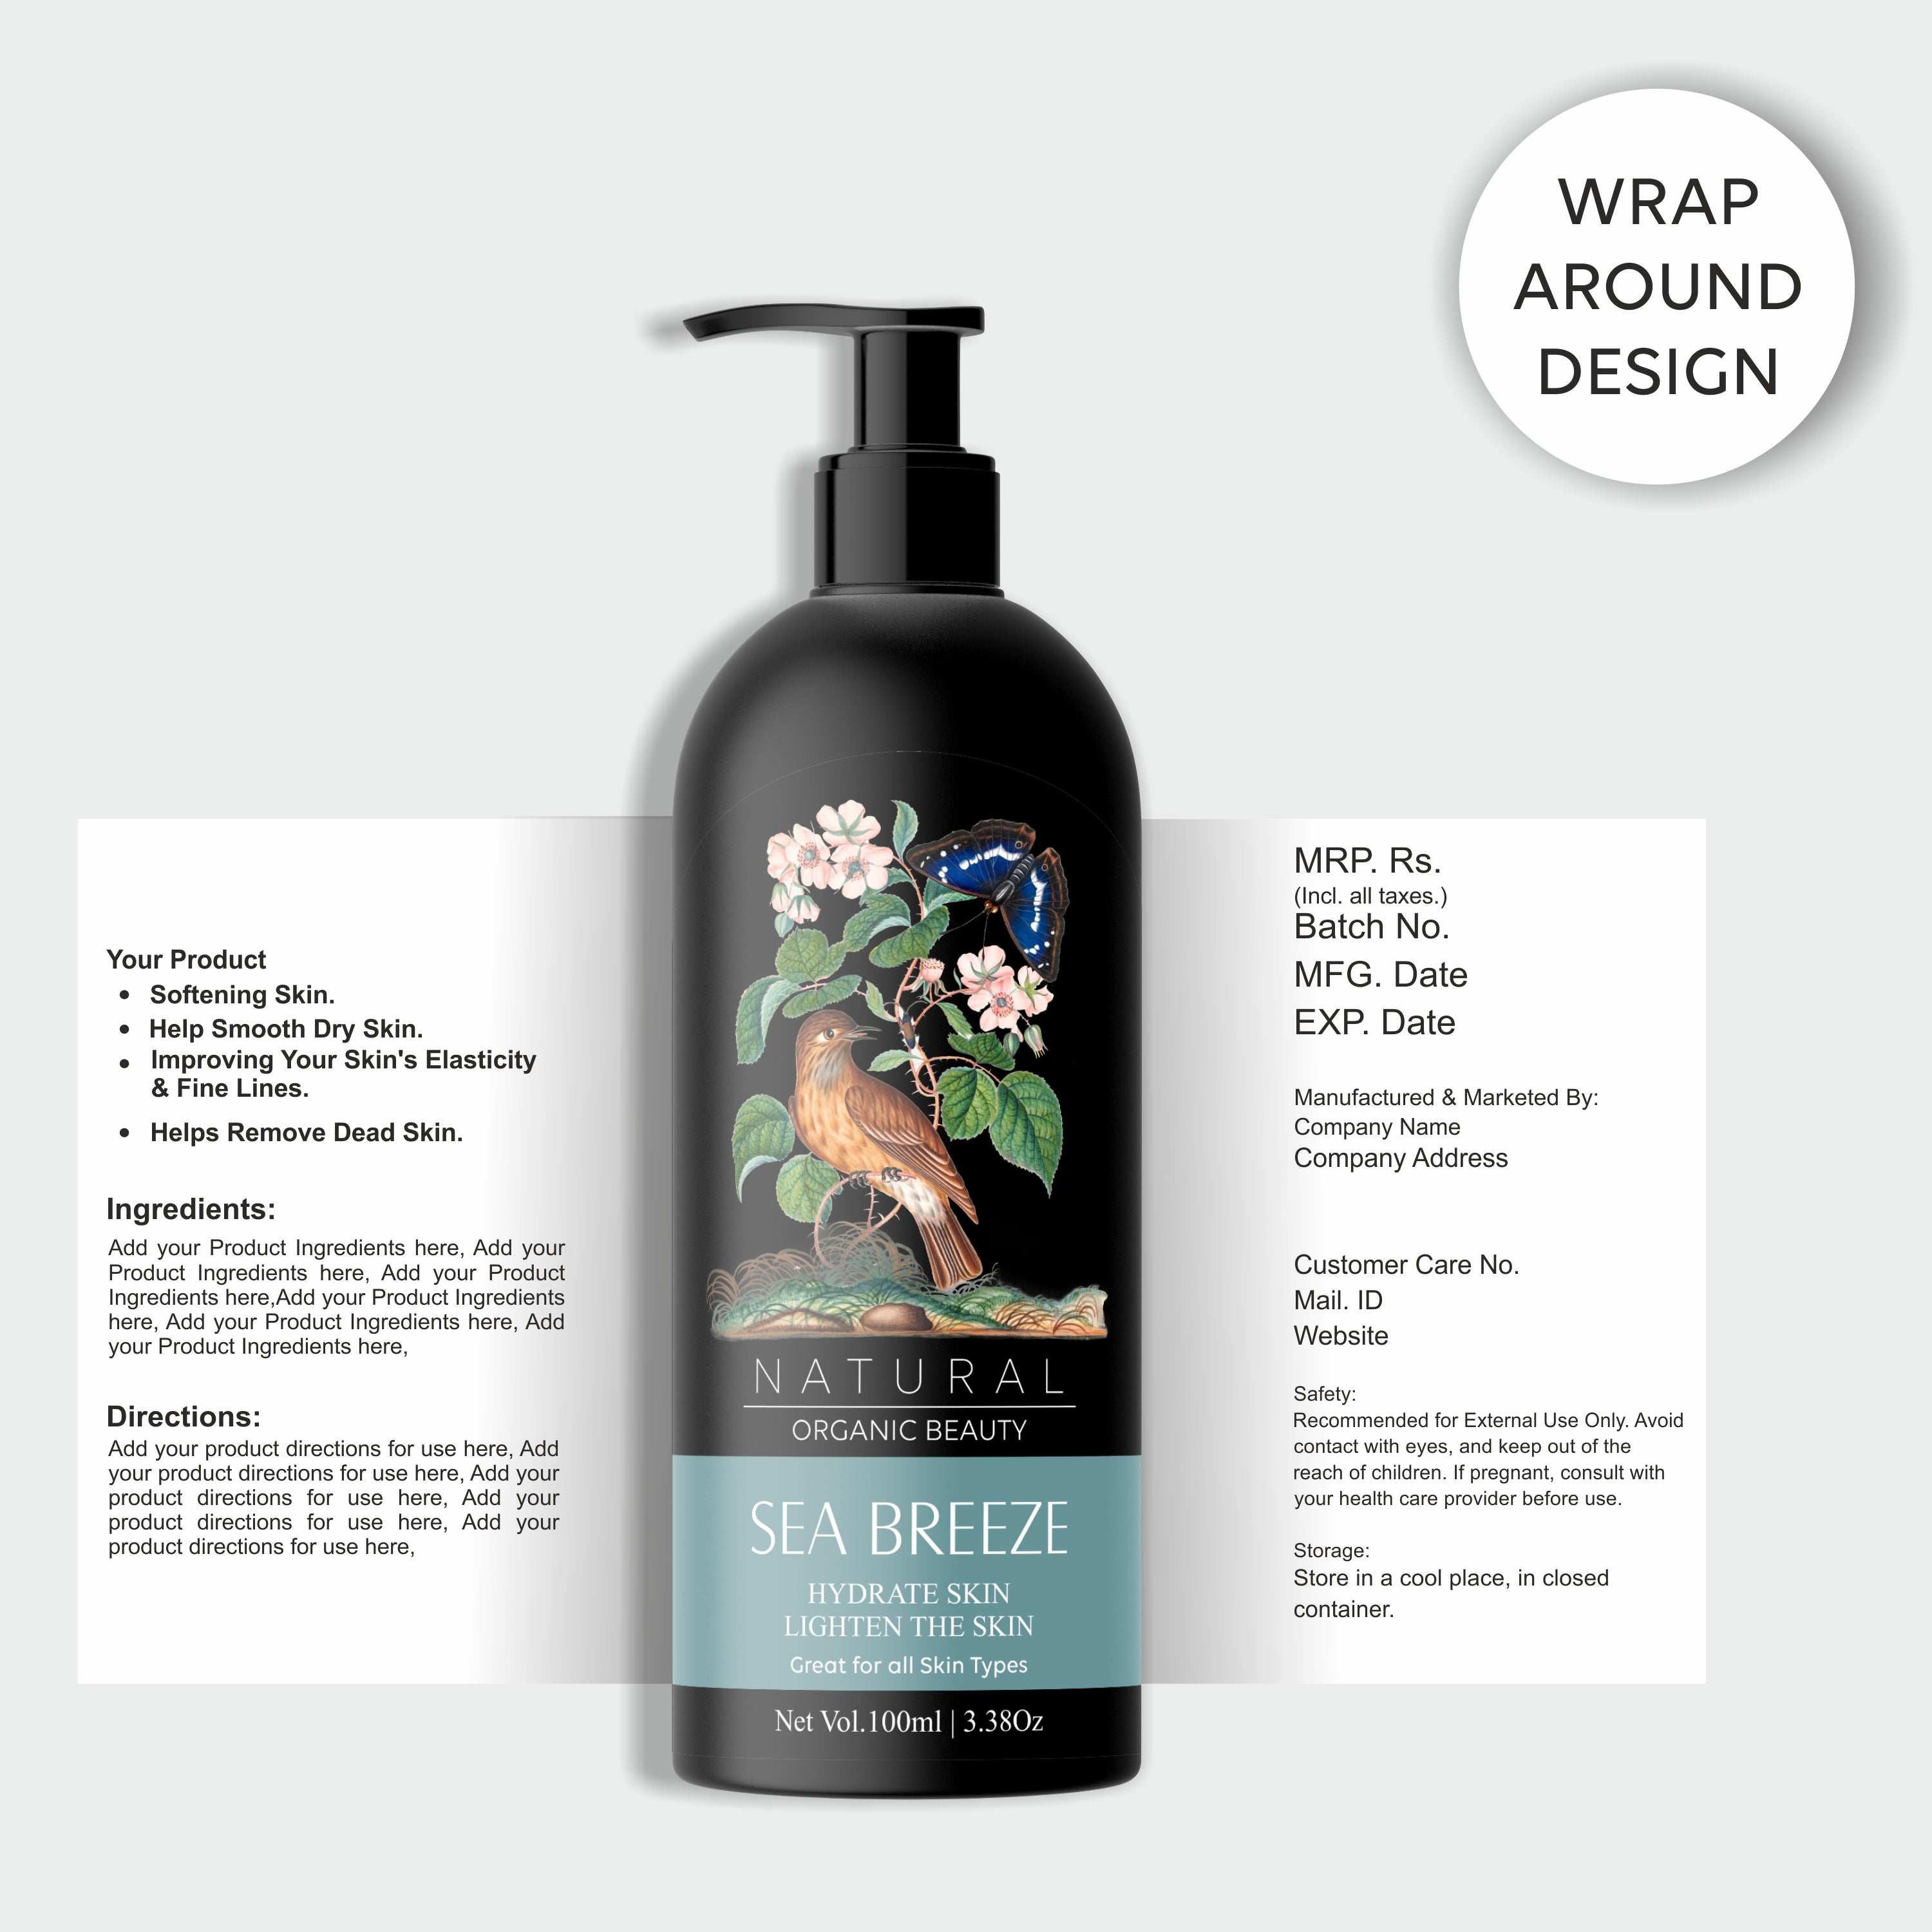 Digital labels, customized label, diy, Templates, canva editing, editable labels, product labels, bottle label, jar label, serum bottle label, shampoo bottle label. jar & containers